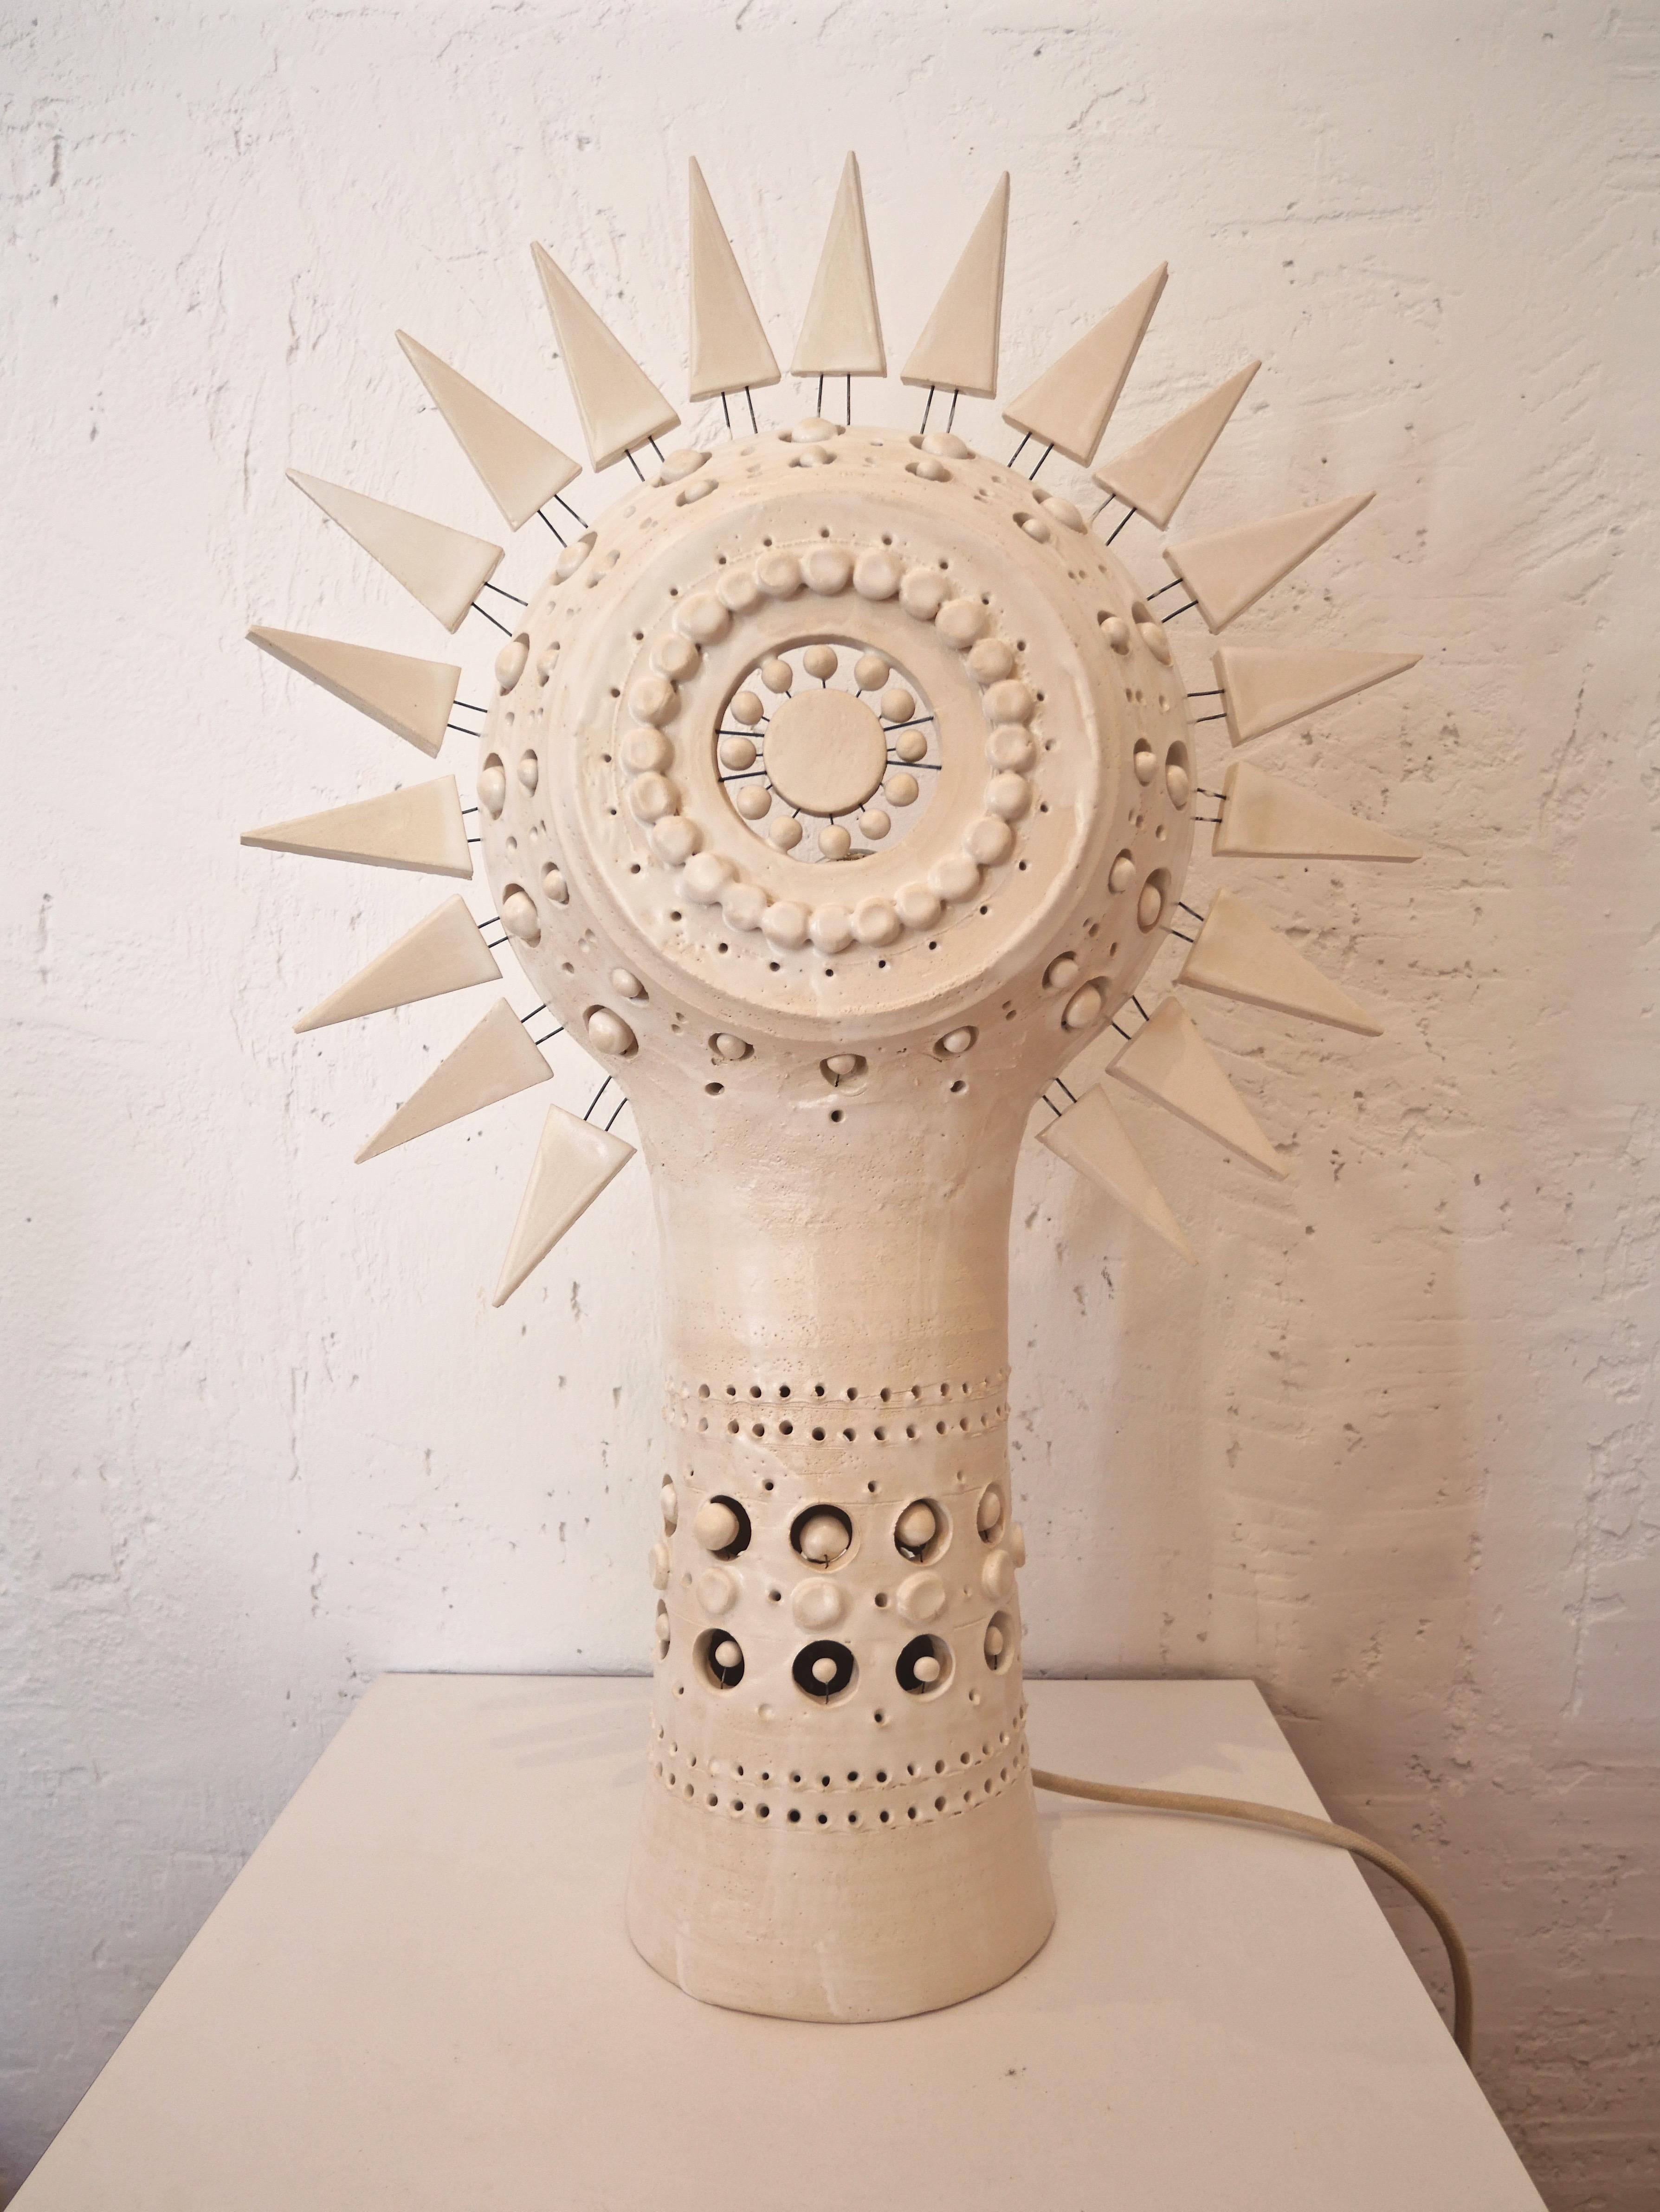 Contemporary Georges Pelletier Sun Table Lamp in White Enameled Ceramic, France, 2020